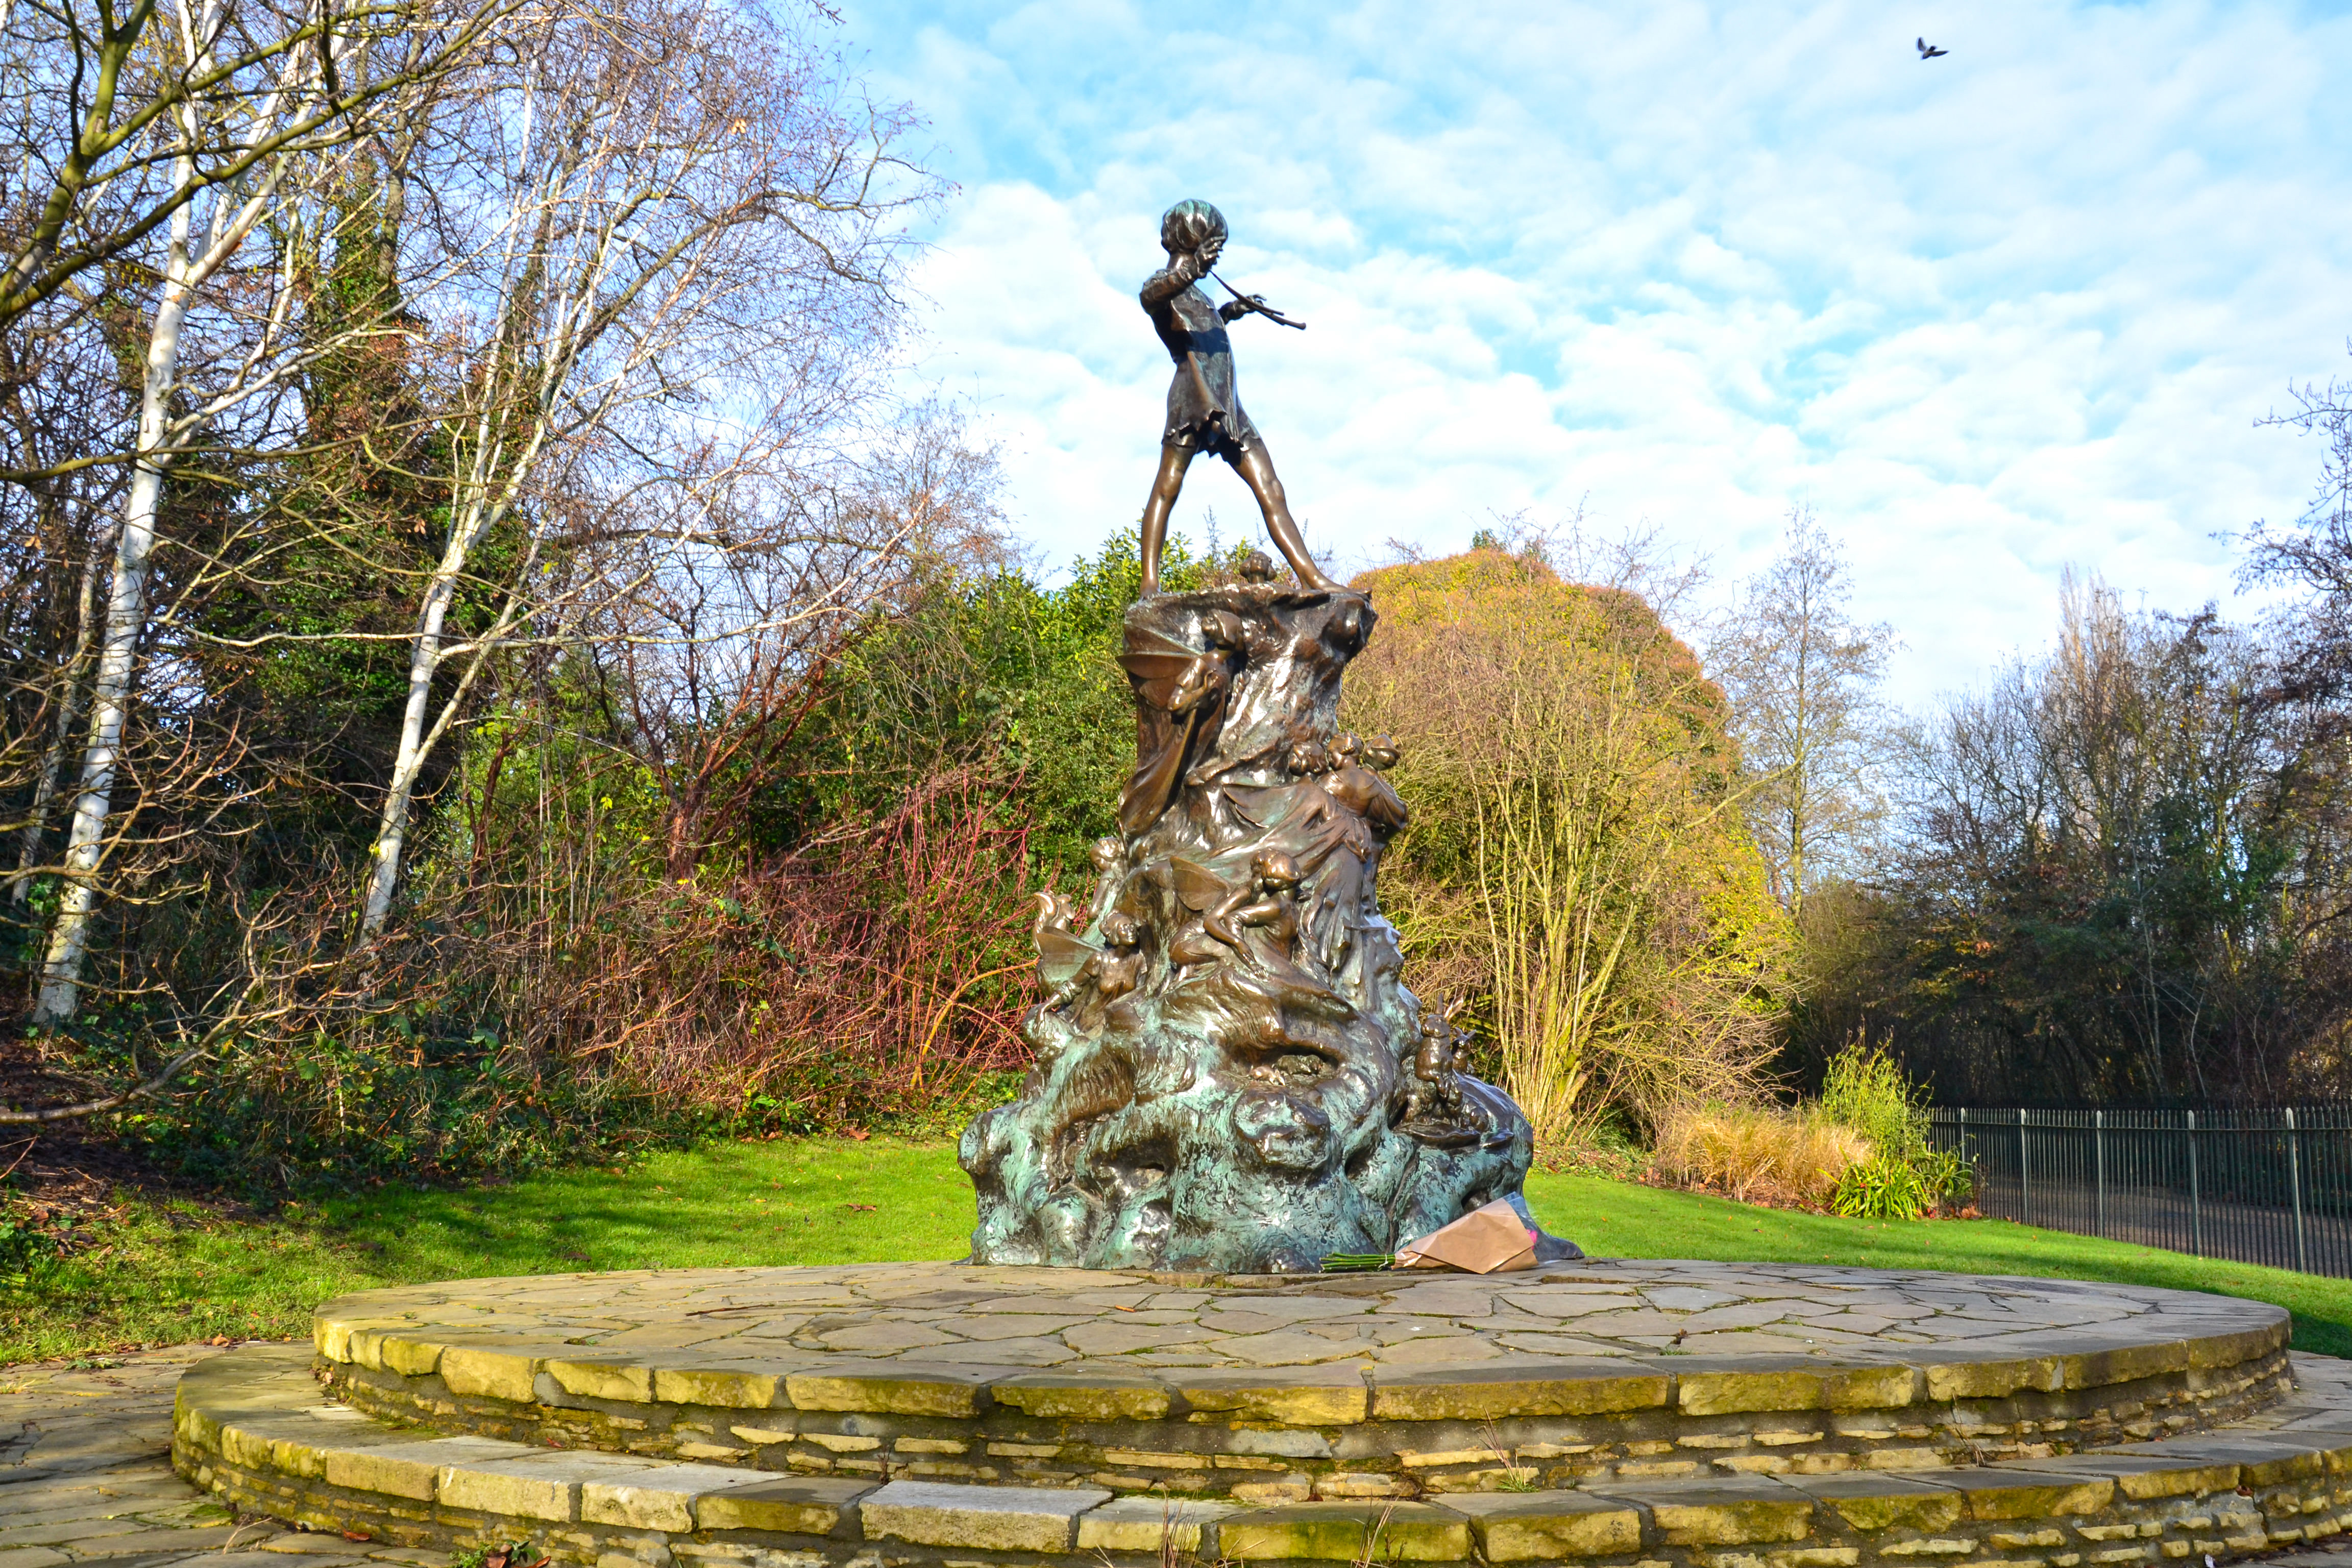 Peter Pan Statue | London, England Attractions - Lonely Planet4608 x 3072